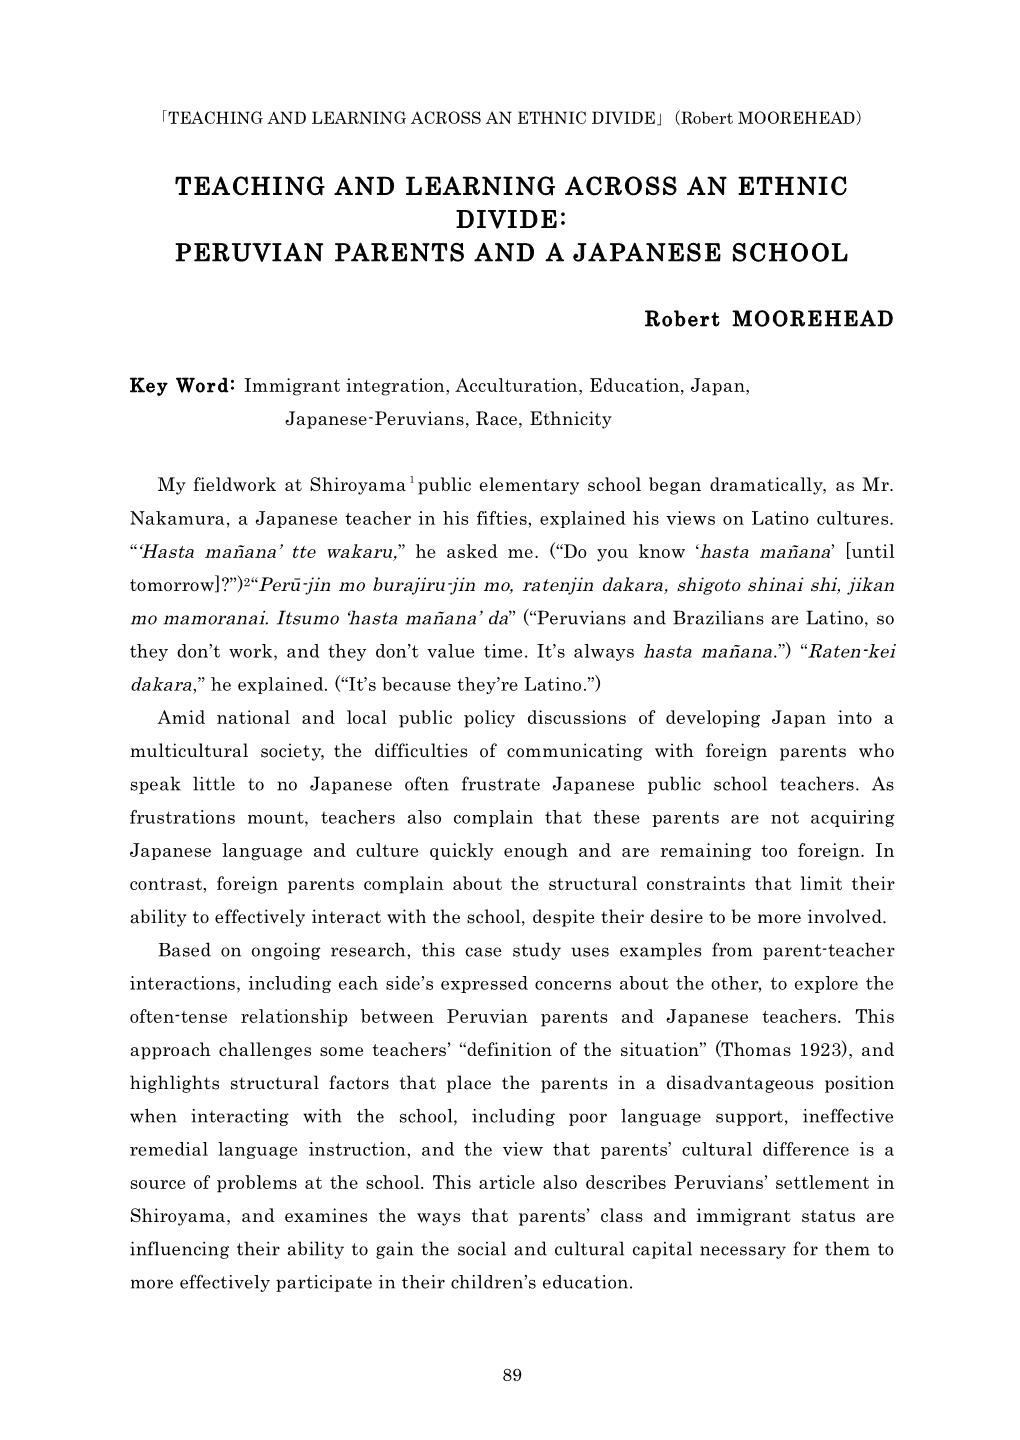 Teaching and Learning Across an Ethnic Divide: Peruvian Parents and a Japanese School